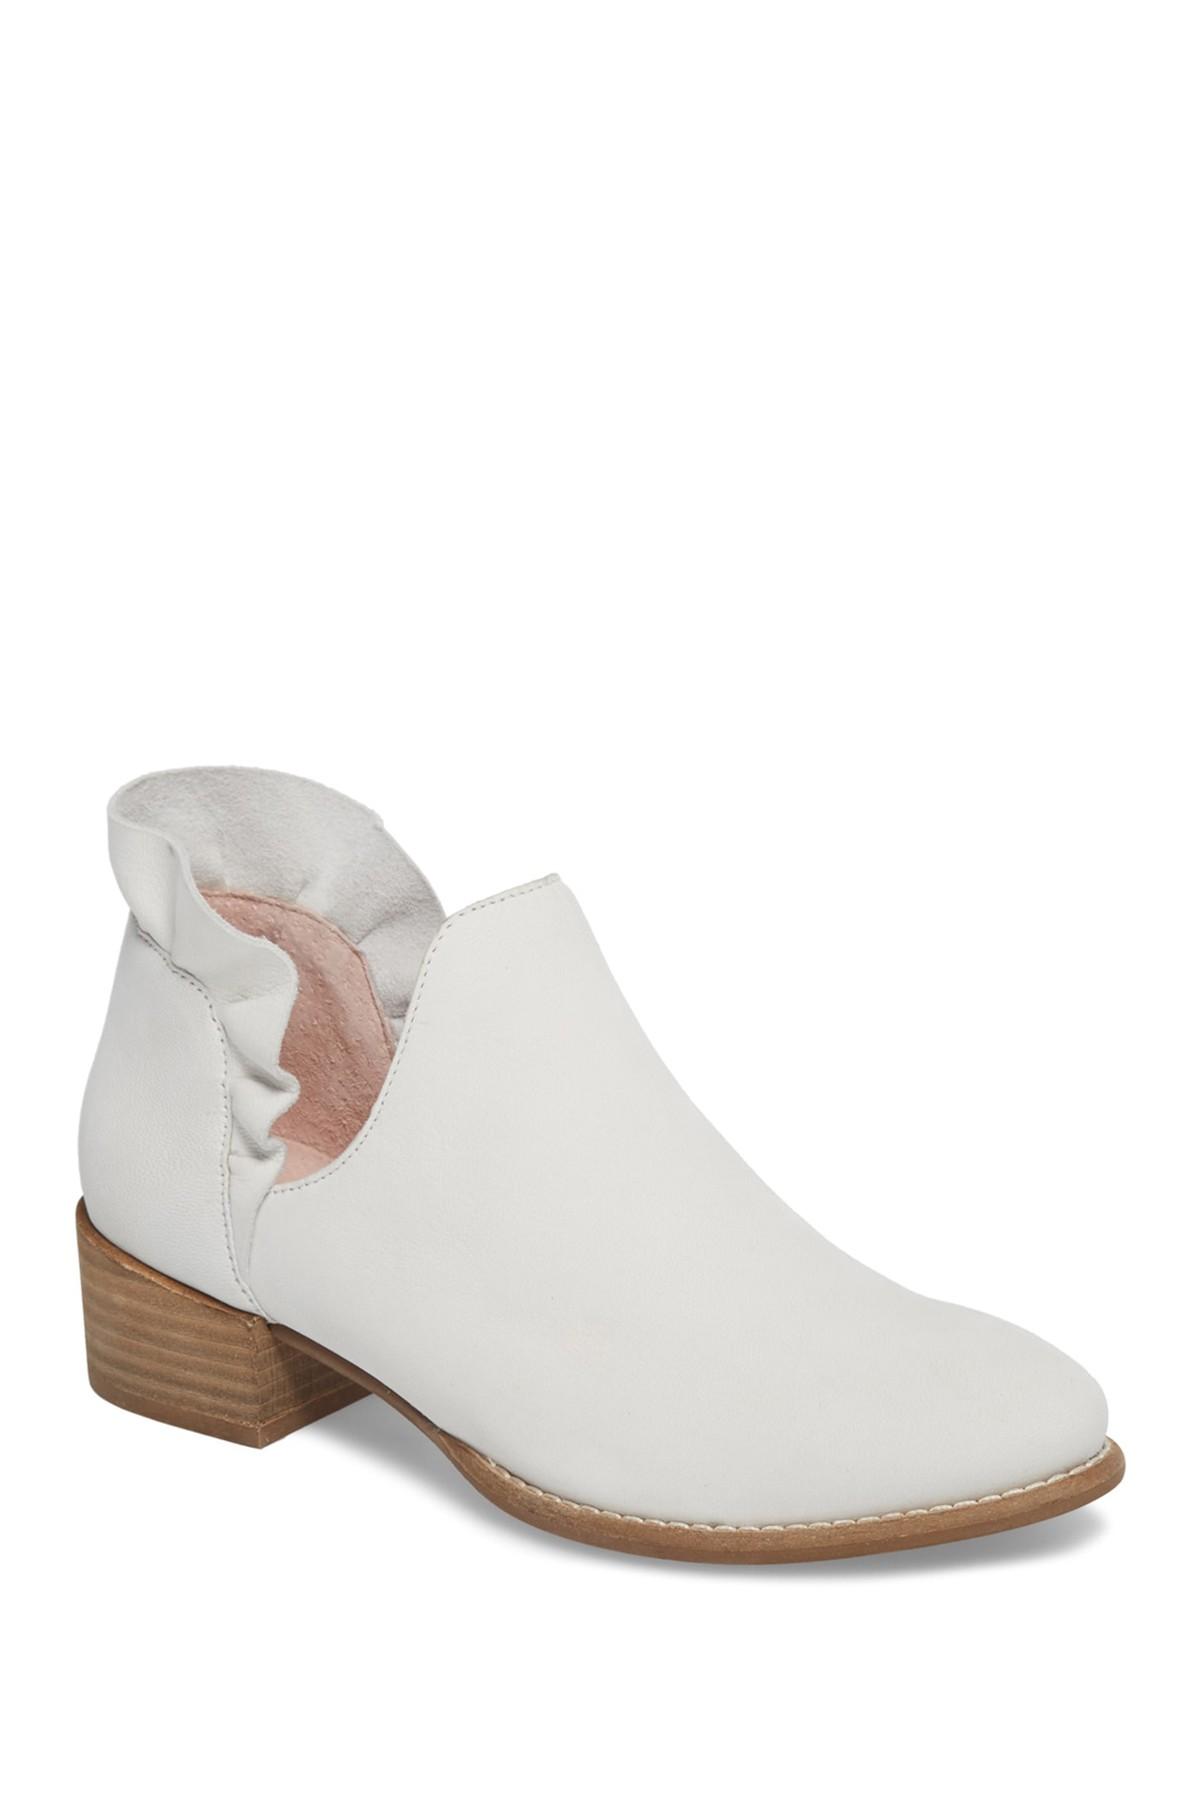 Seychelles Renowned Ruffle Bootie in 